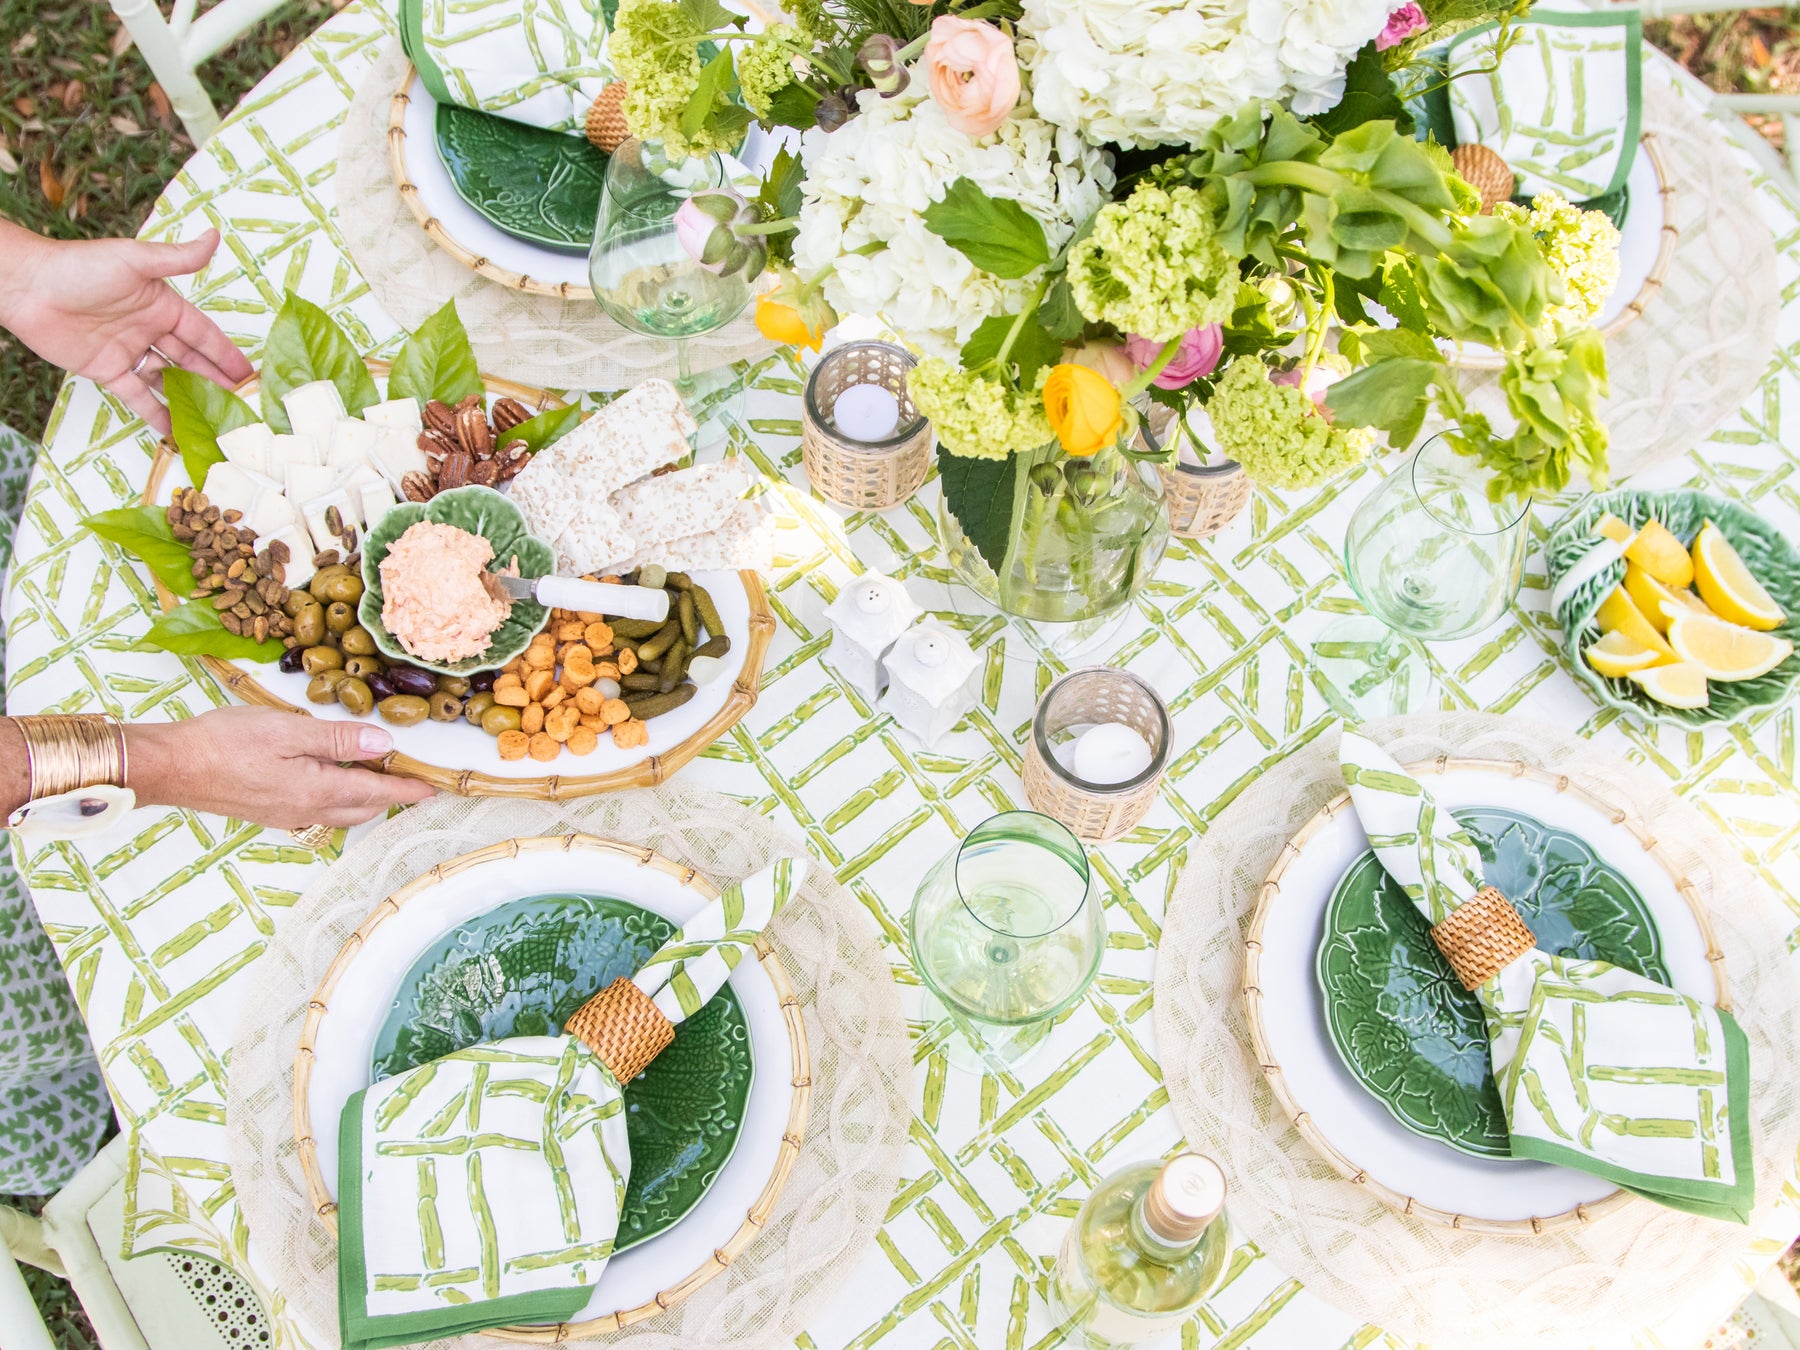 Setting Your Table for Spring